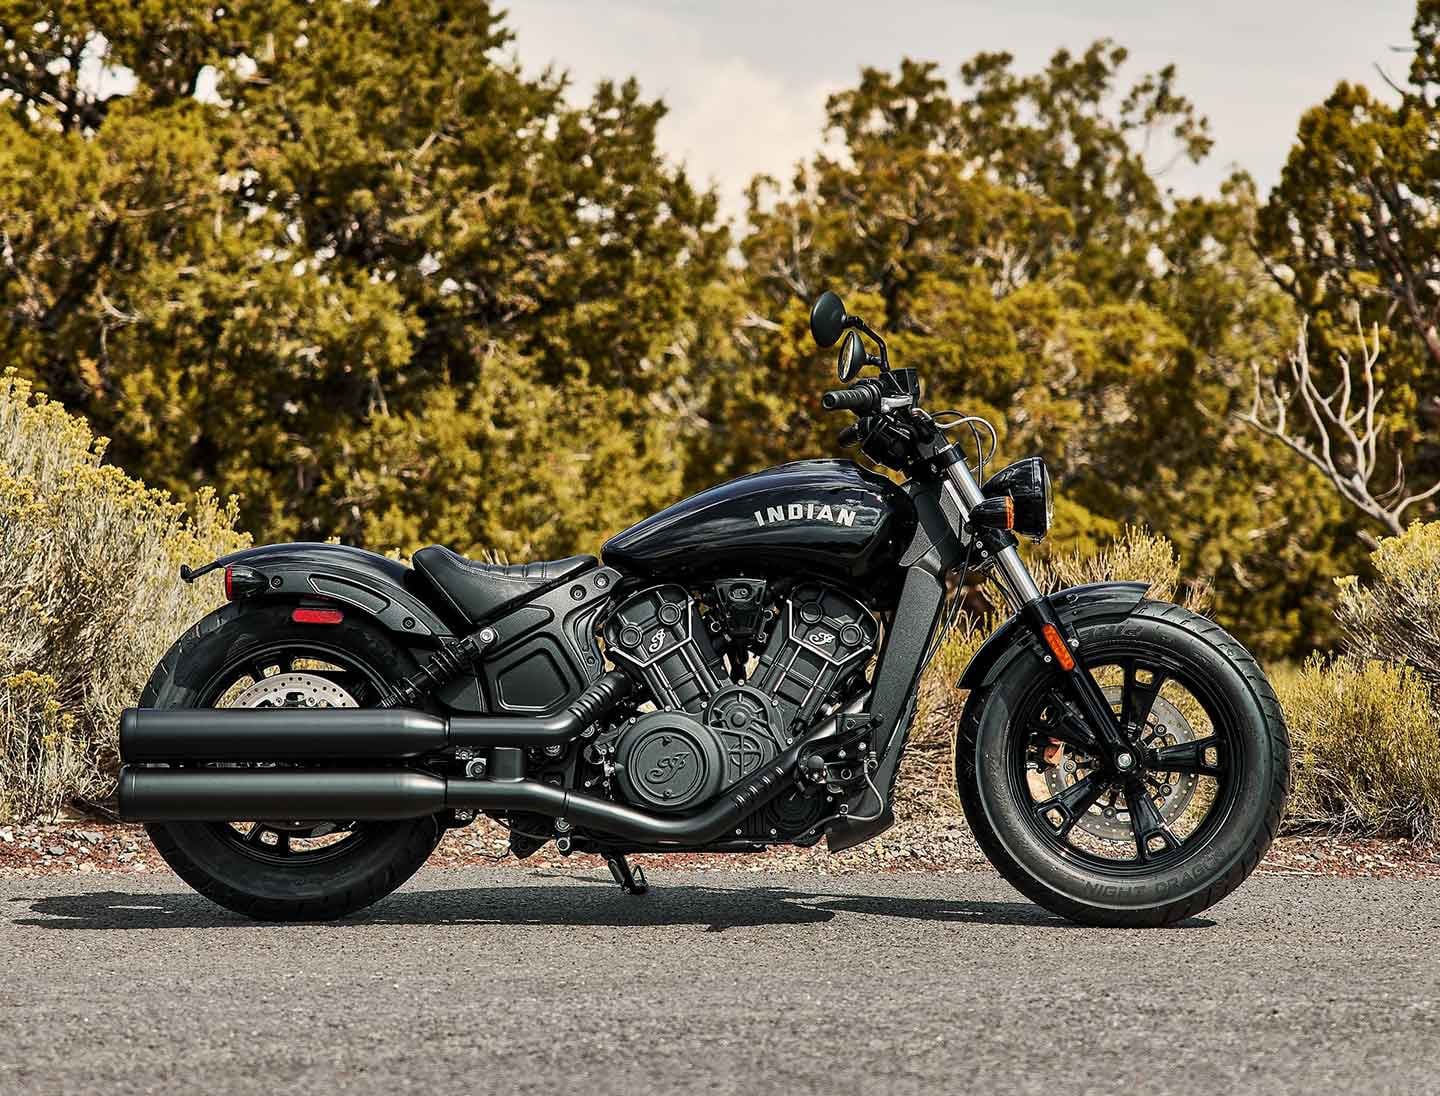 The lowest-priced bike in the series returns with its 60ci engine, elemental vibe, and blacked-out styling. It even has the same MSRP as last year, though there are different color options for 2024, including Black Smoke, Sunset Red Metallic, and Ghost White Metallic. You can still have it in Black Metallic ($10,749 without ABS).